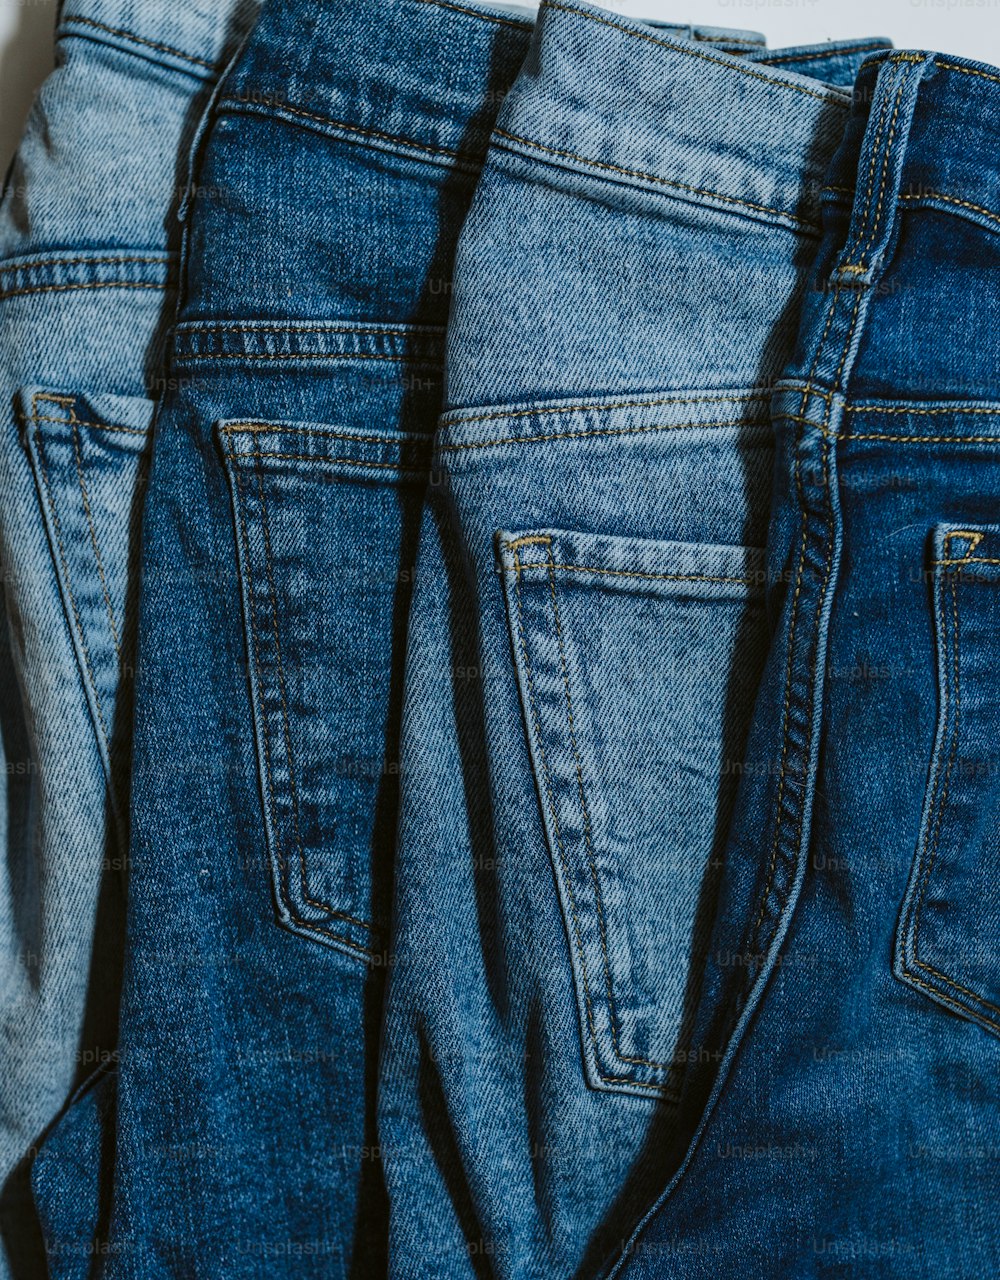 three pairs of jeans are lined up on a white surface